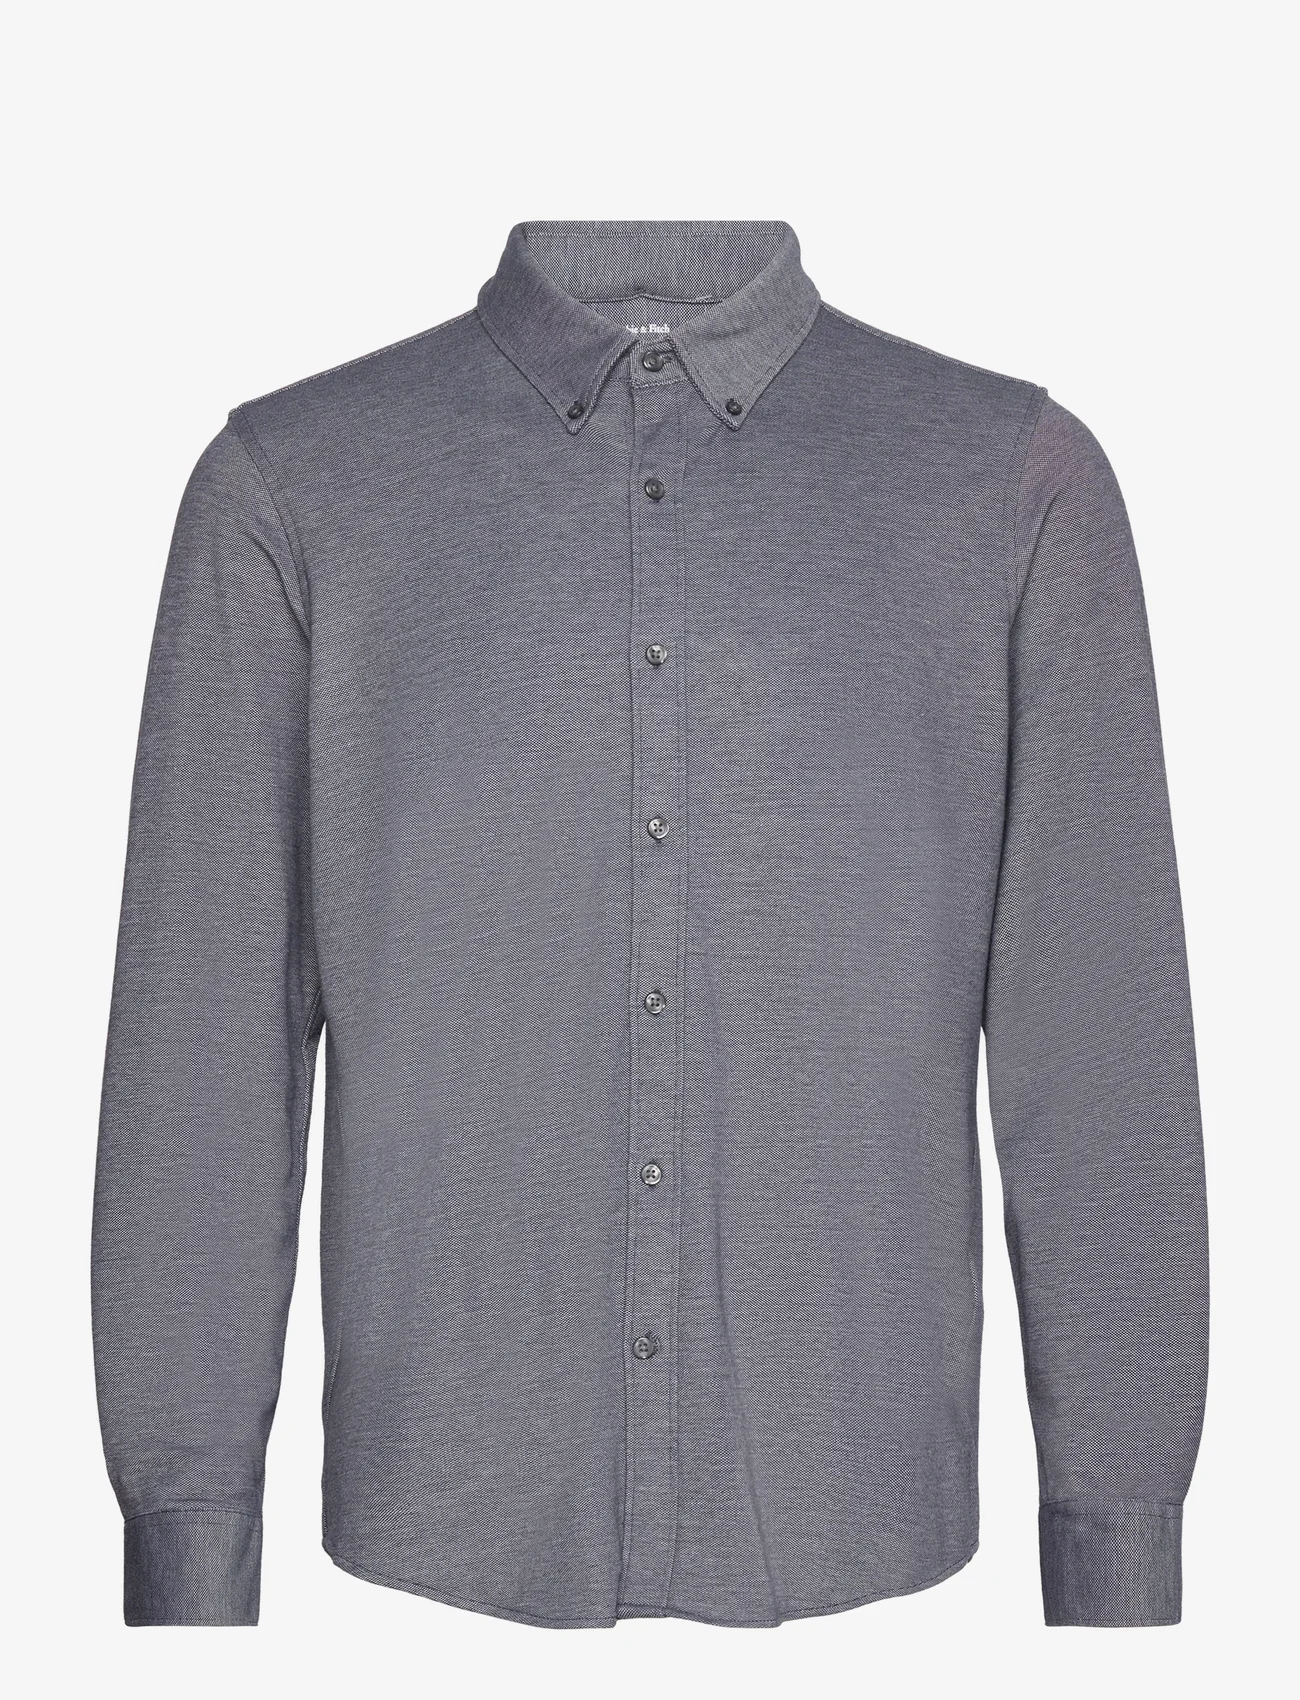 Abercrombie & Fitch - ANF MENS WOVENS - oxford-skjortor - blue - 0